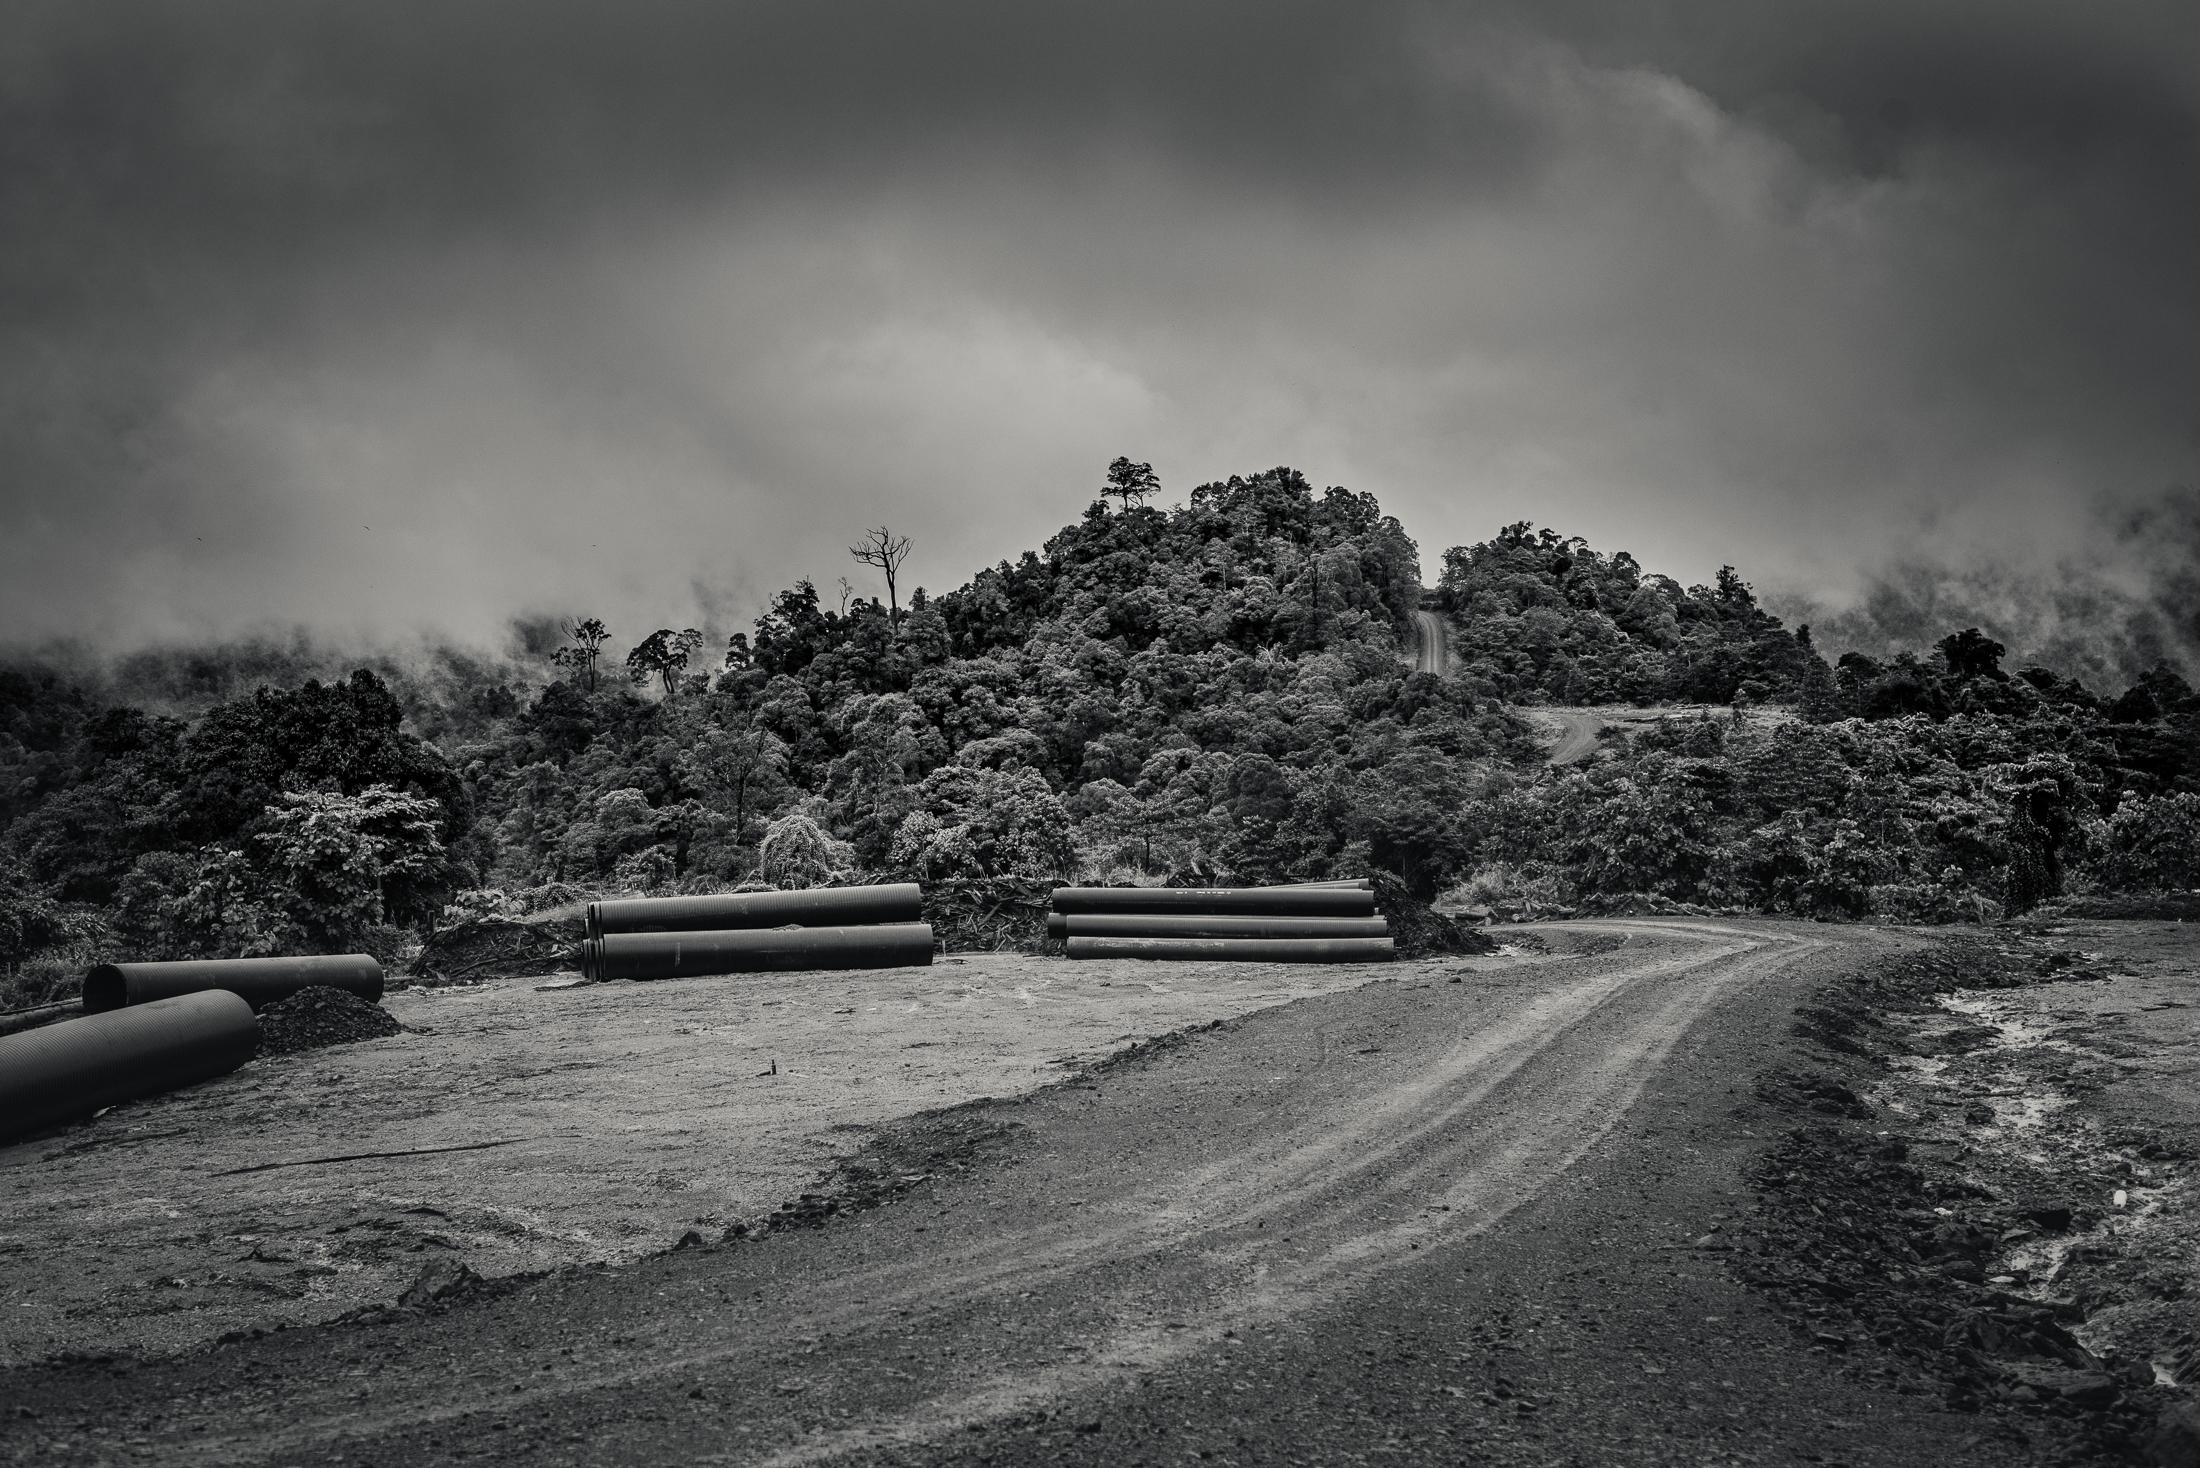 Indigenous Land Rights in Sarawak -  Along a logging   road throuugh the jungles of Borneo,...